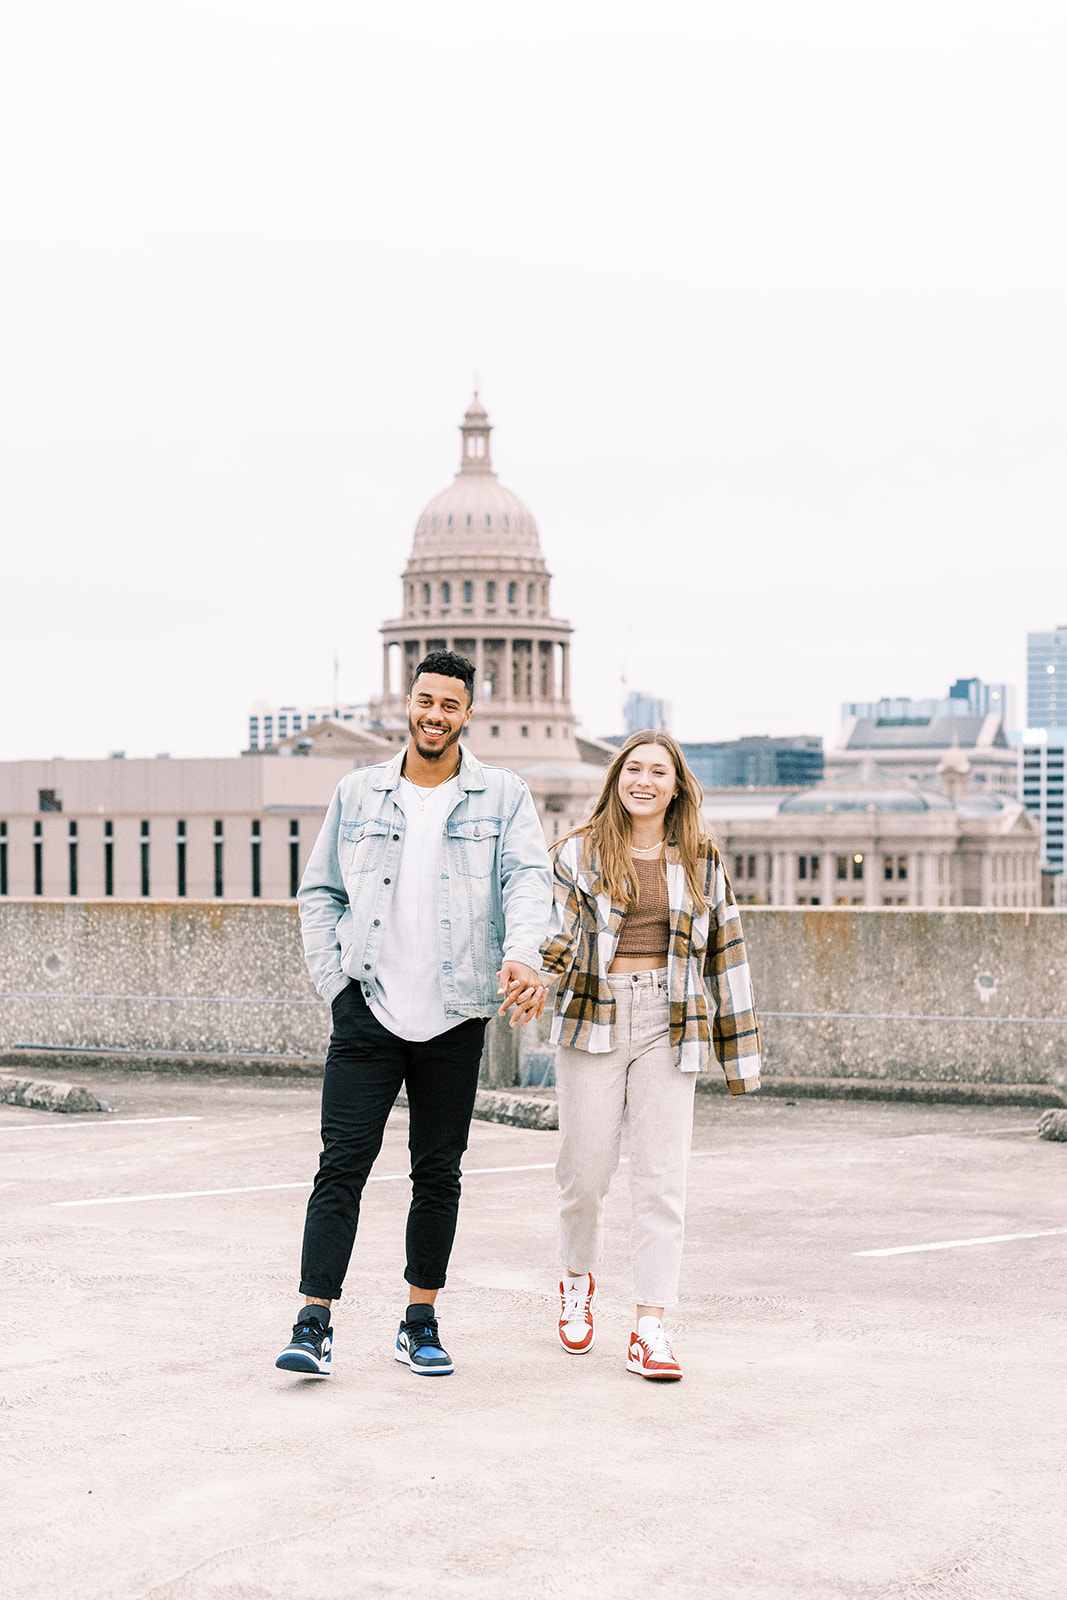 A happy couple walking together while holding hands during couples photoshoot in Texas